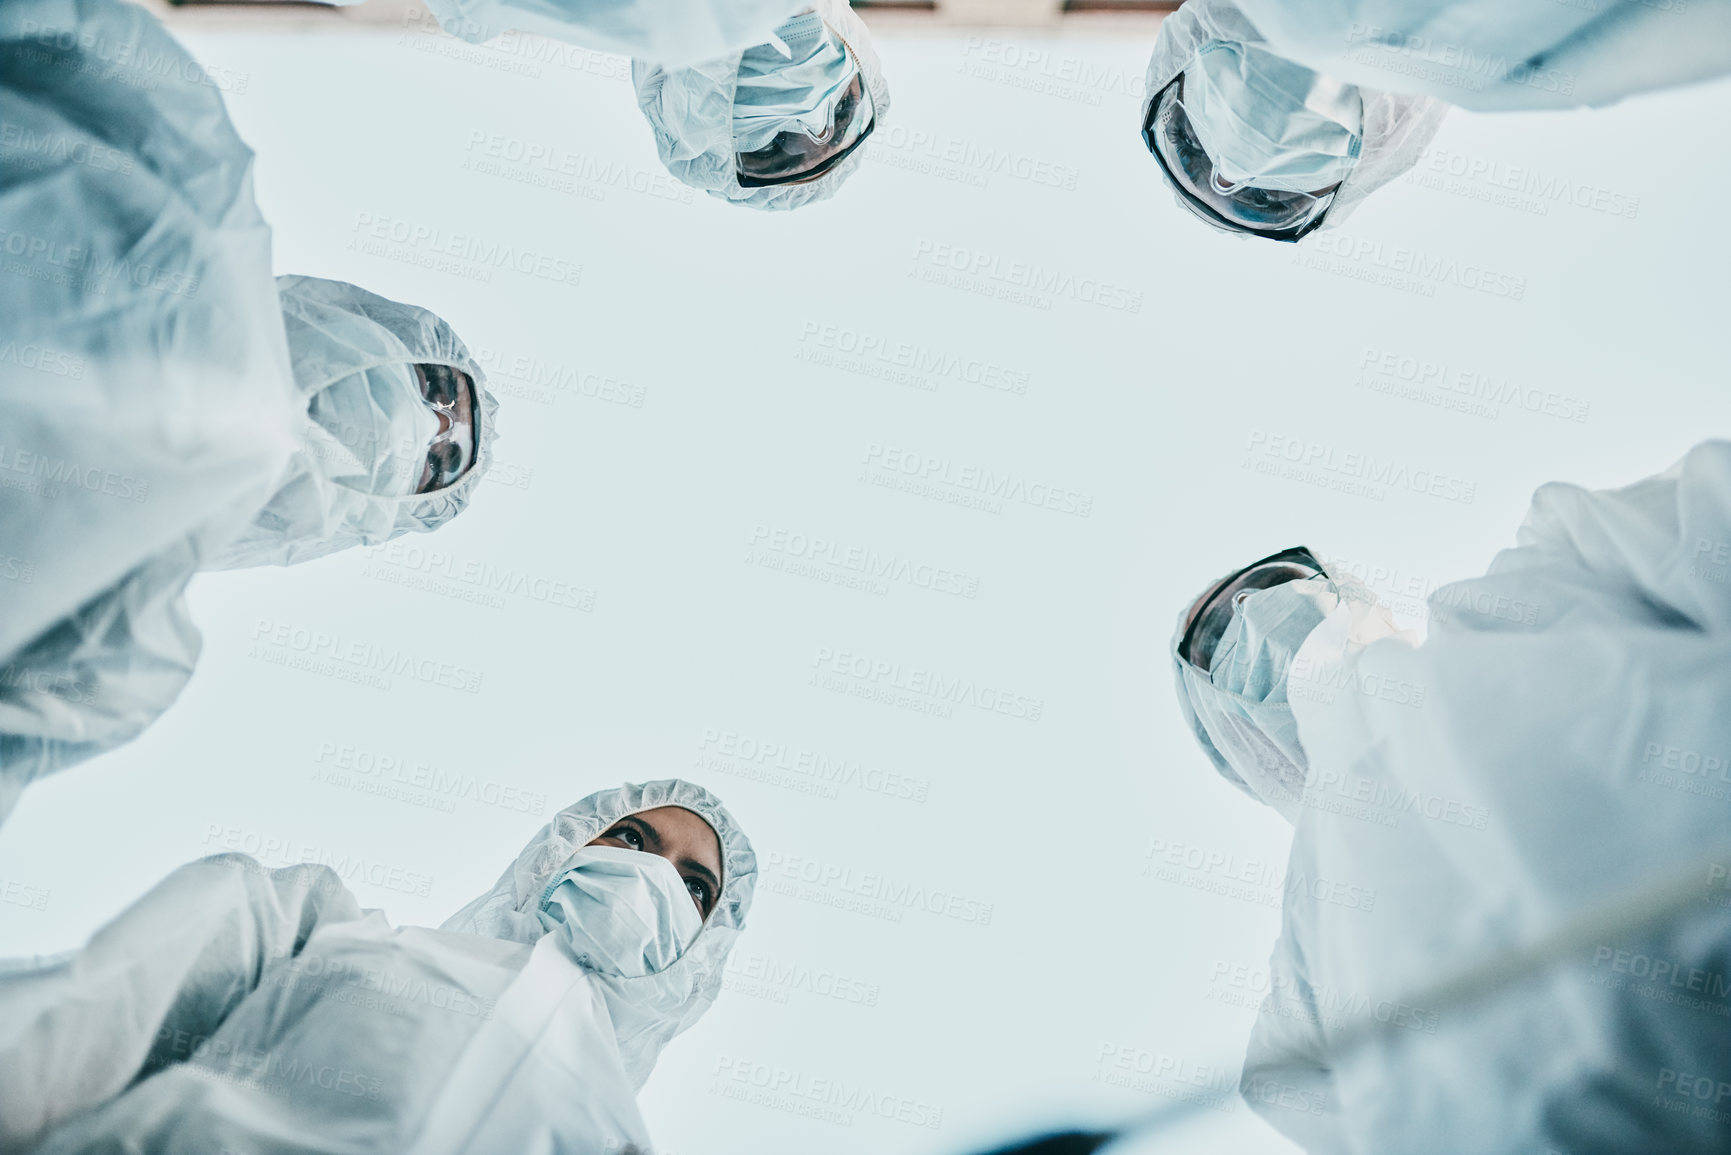 Buy stock photo Covid pandemic outbreak team of doctors or medical workers wearing protective ppe to prevent spread of virus in hospital. Group of scientists wearing hazmat suits for corona or ebola disease in lab.